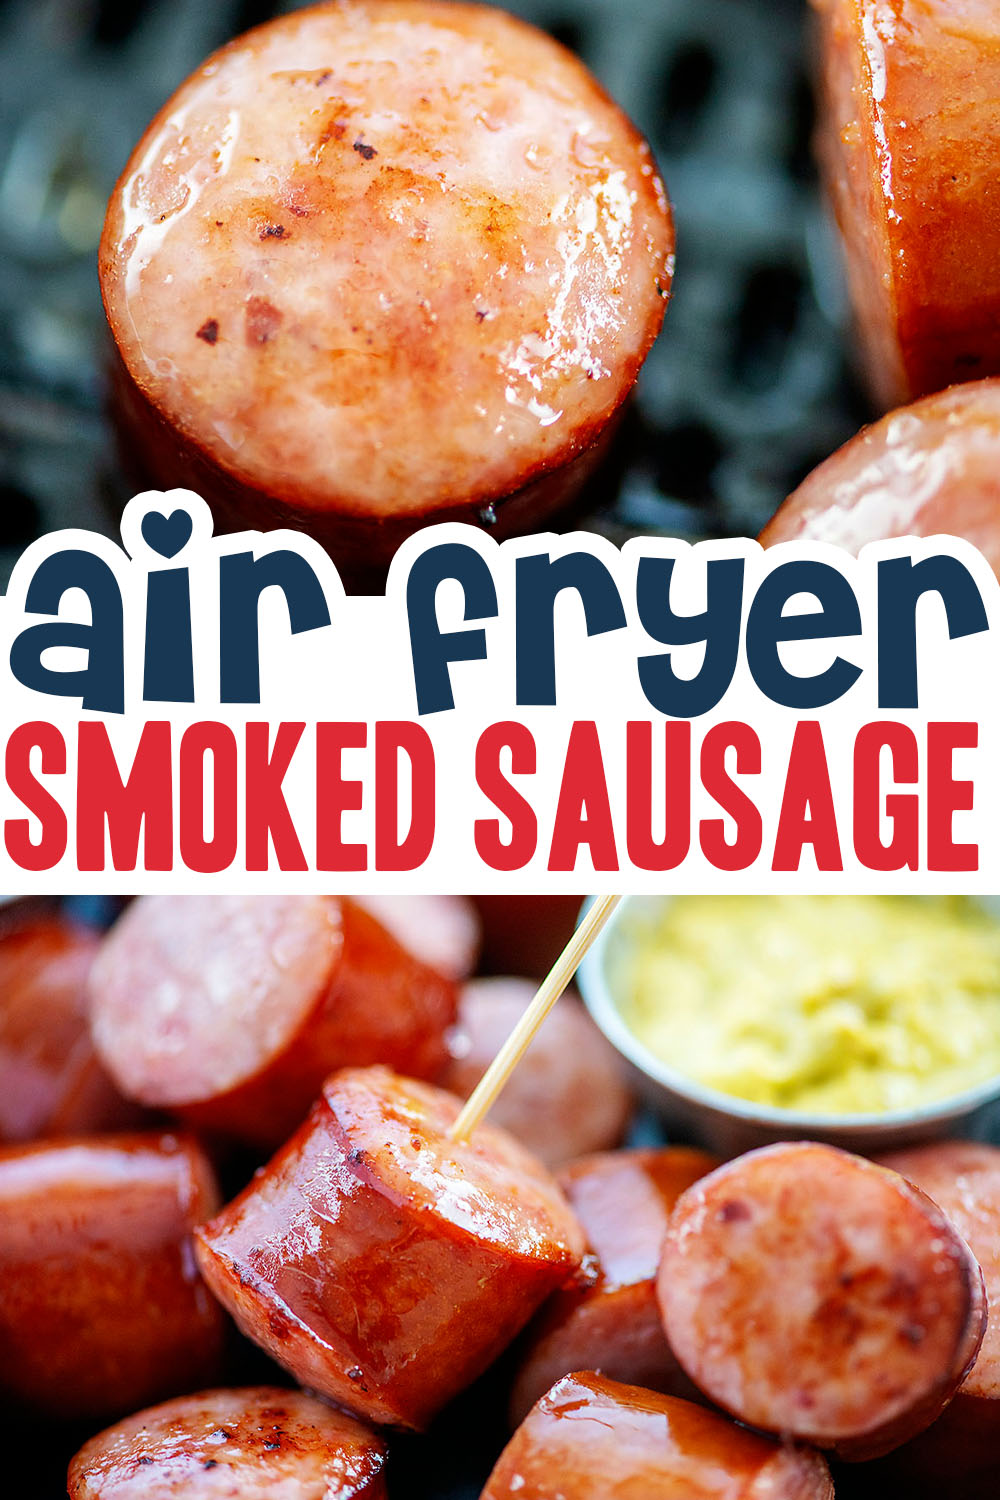 This recipe for air fryer smoked sausage is super simple!  You can serve this as a main course or an appetizer!